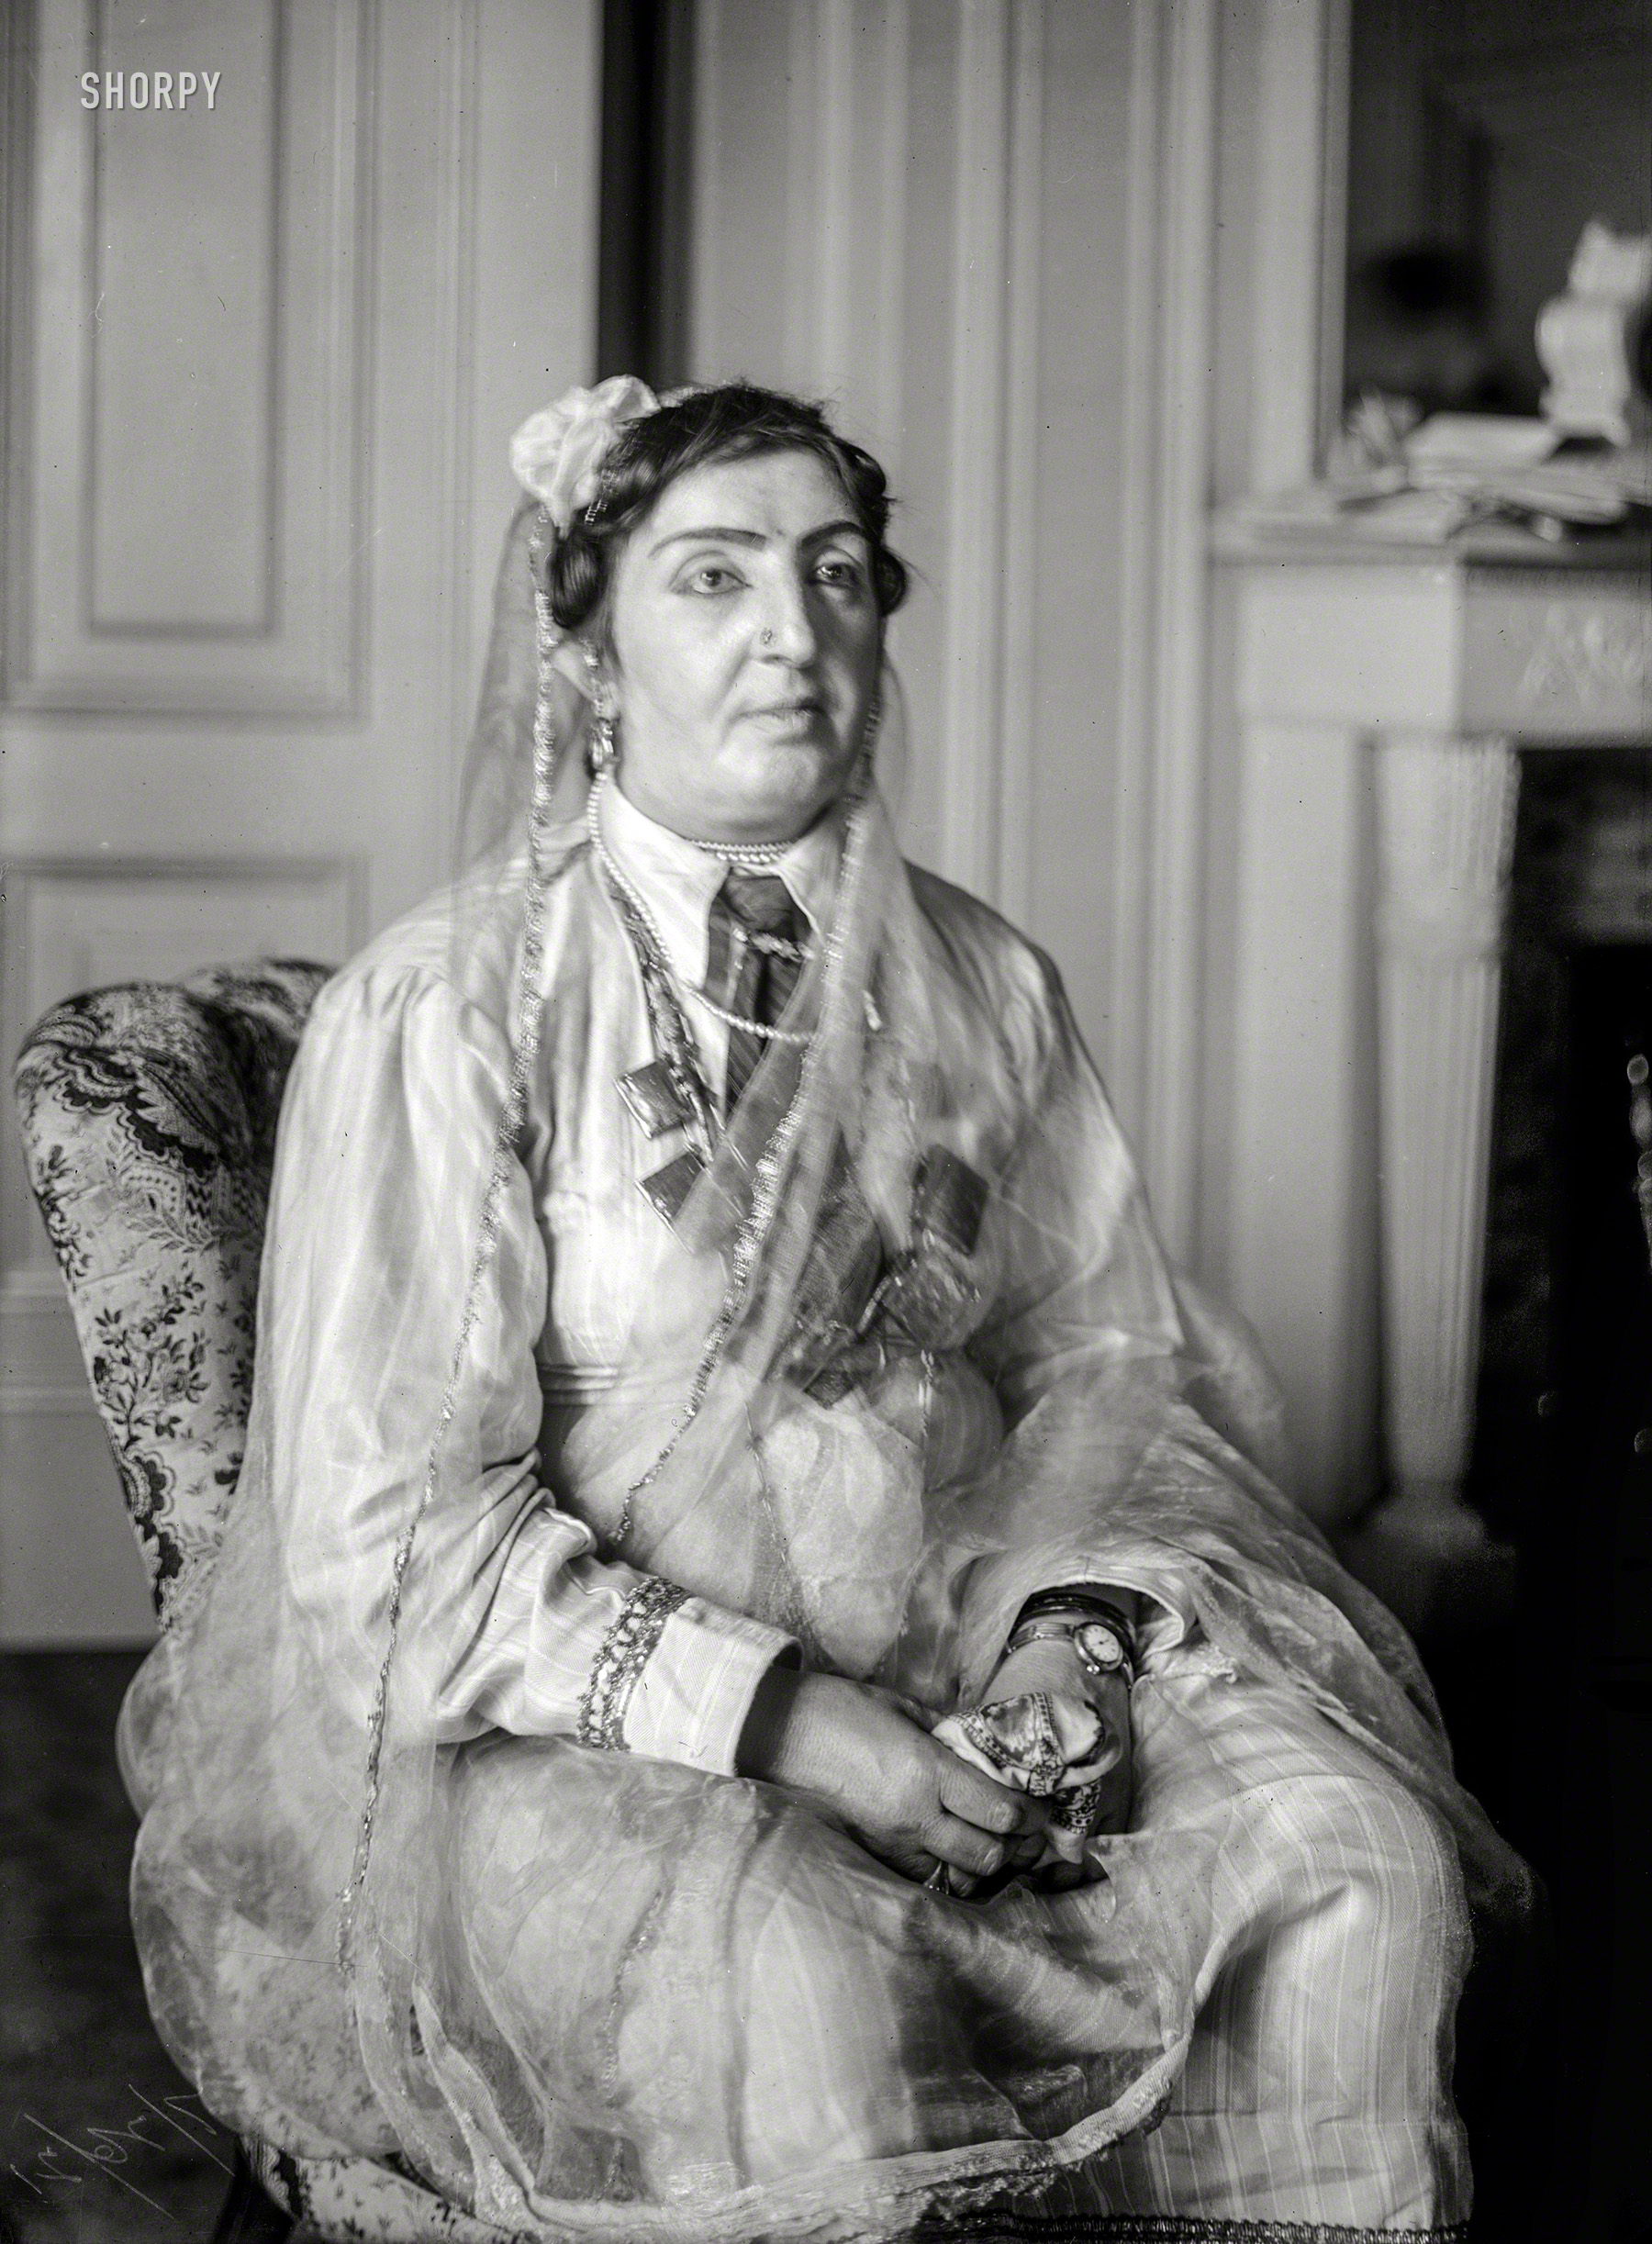 July 1921. New York. "Princess Fatima Sultana of Afghanistan." The "princess," whose claim to royalty was questionable, met with President Harding in Washington after a notorious impostor named Stanley Weyman (among other aliases), pretending to be a "naval liaison," tricked the State Department into arranging the interview. 8x10 glass negative, Bain News Service. View full size.
&nbsp; &nbsp; &nbsp; &nbsp; The princess, it was learned, takes out her nose jewel when she goes to bed at night, as other women remove their earrings. Unlike American women, she is not afraid of rats, mice, or bats. The reason for this immunity from those customary feminine fears is that in the Mohammed religion, which she professes, not only cats but all animals are sacred. (Washington Post)